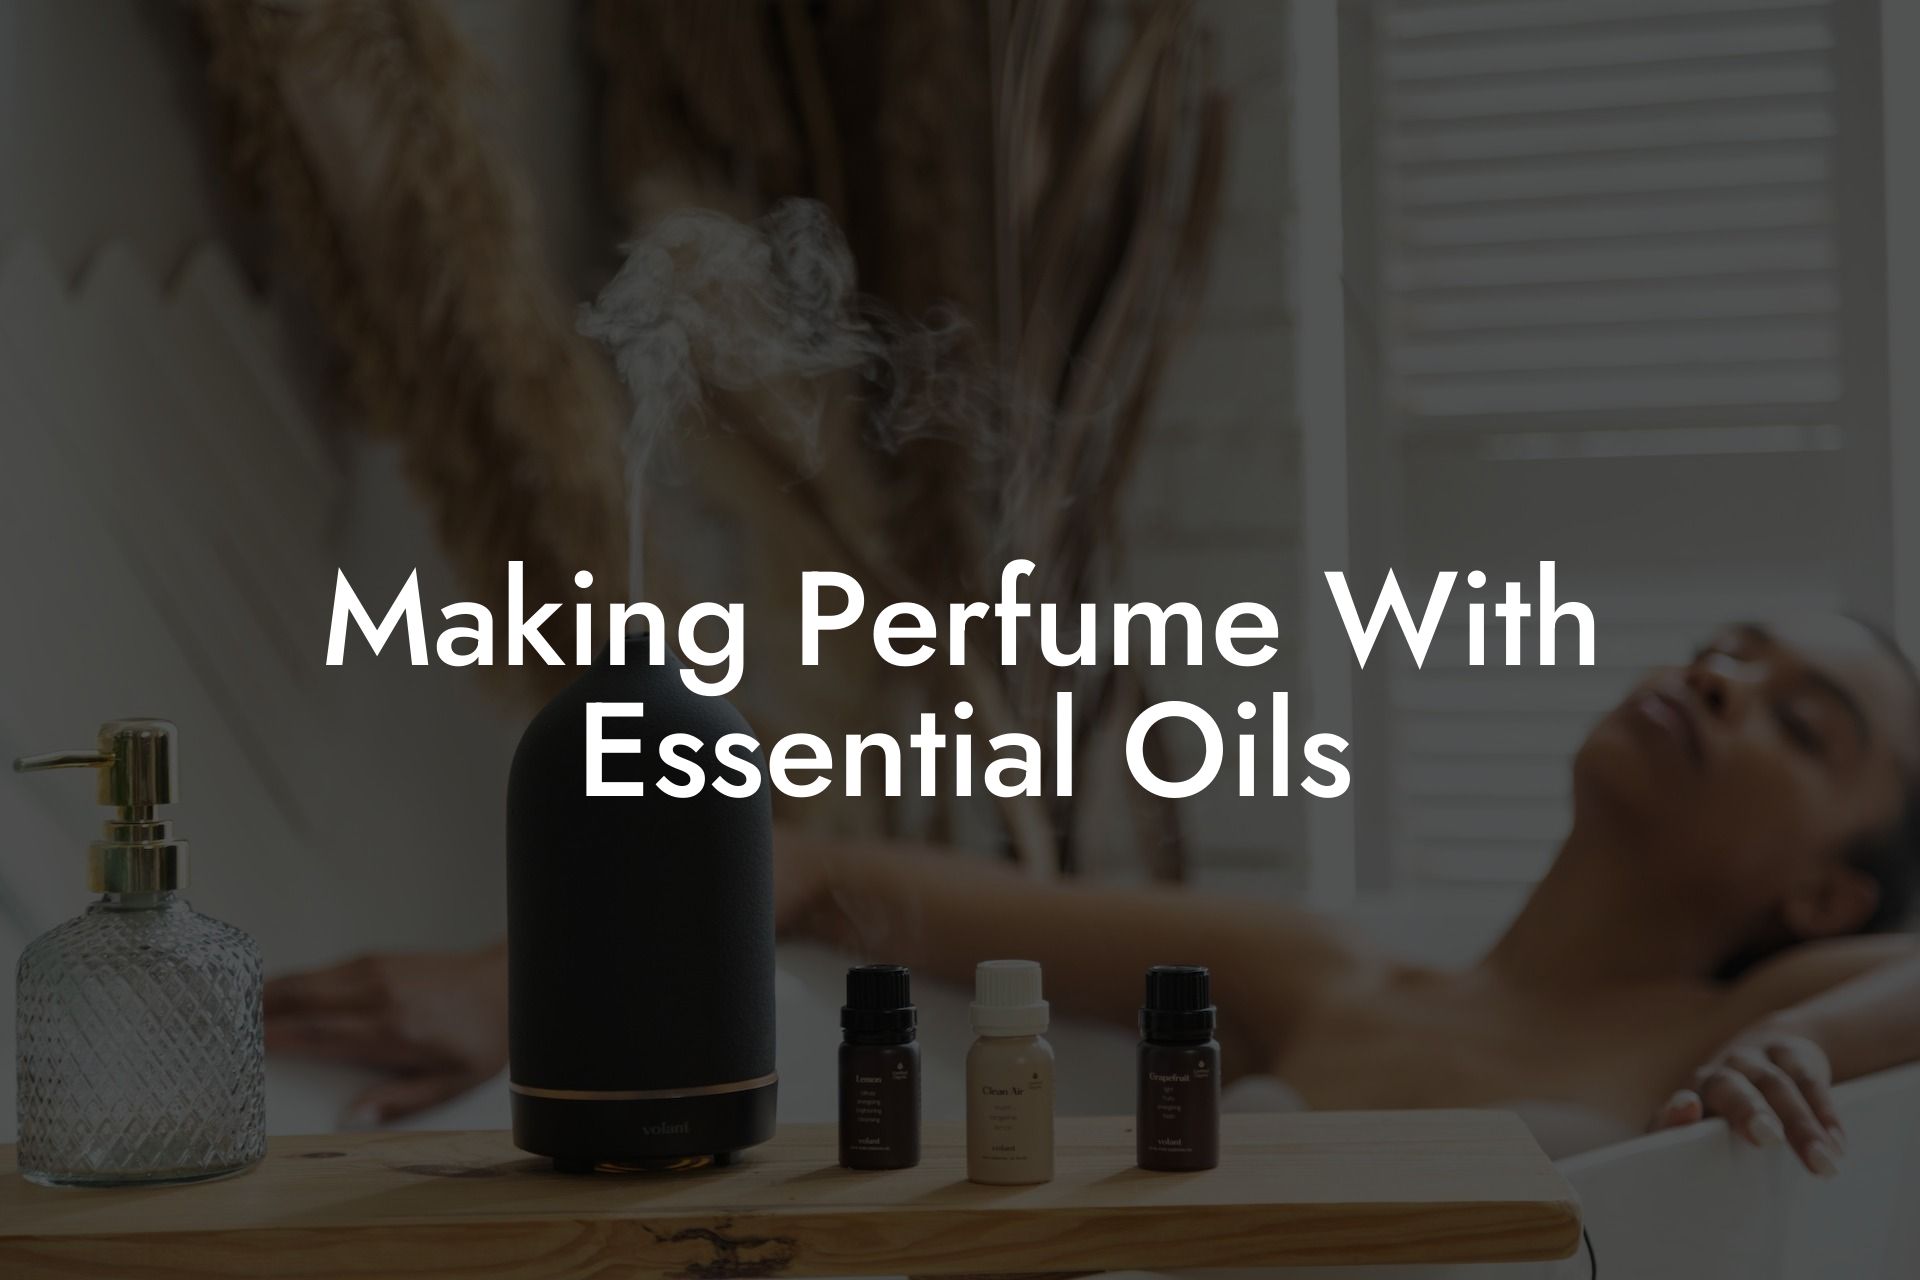 Making Perfume With Essential Oils